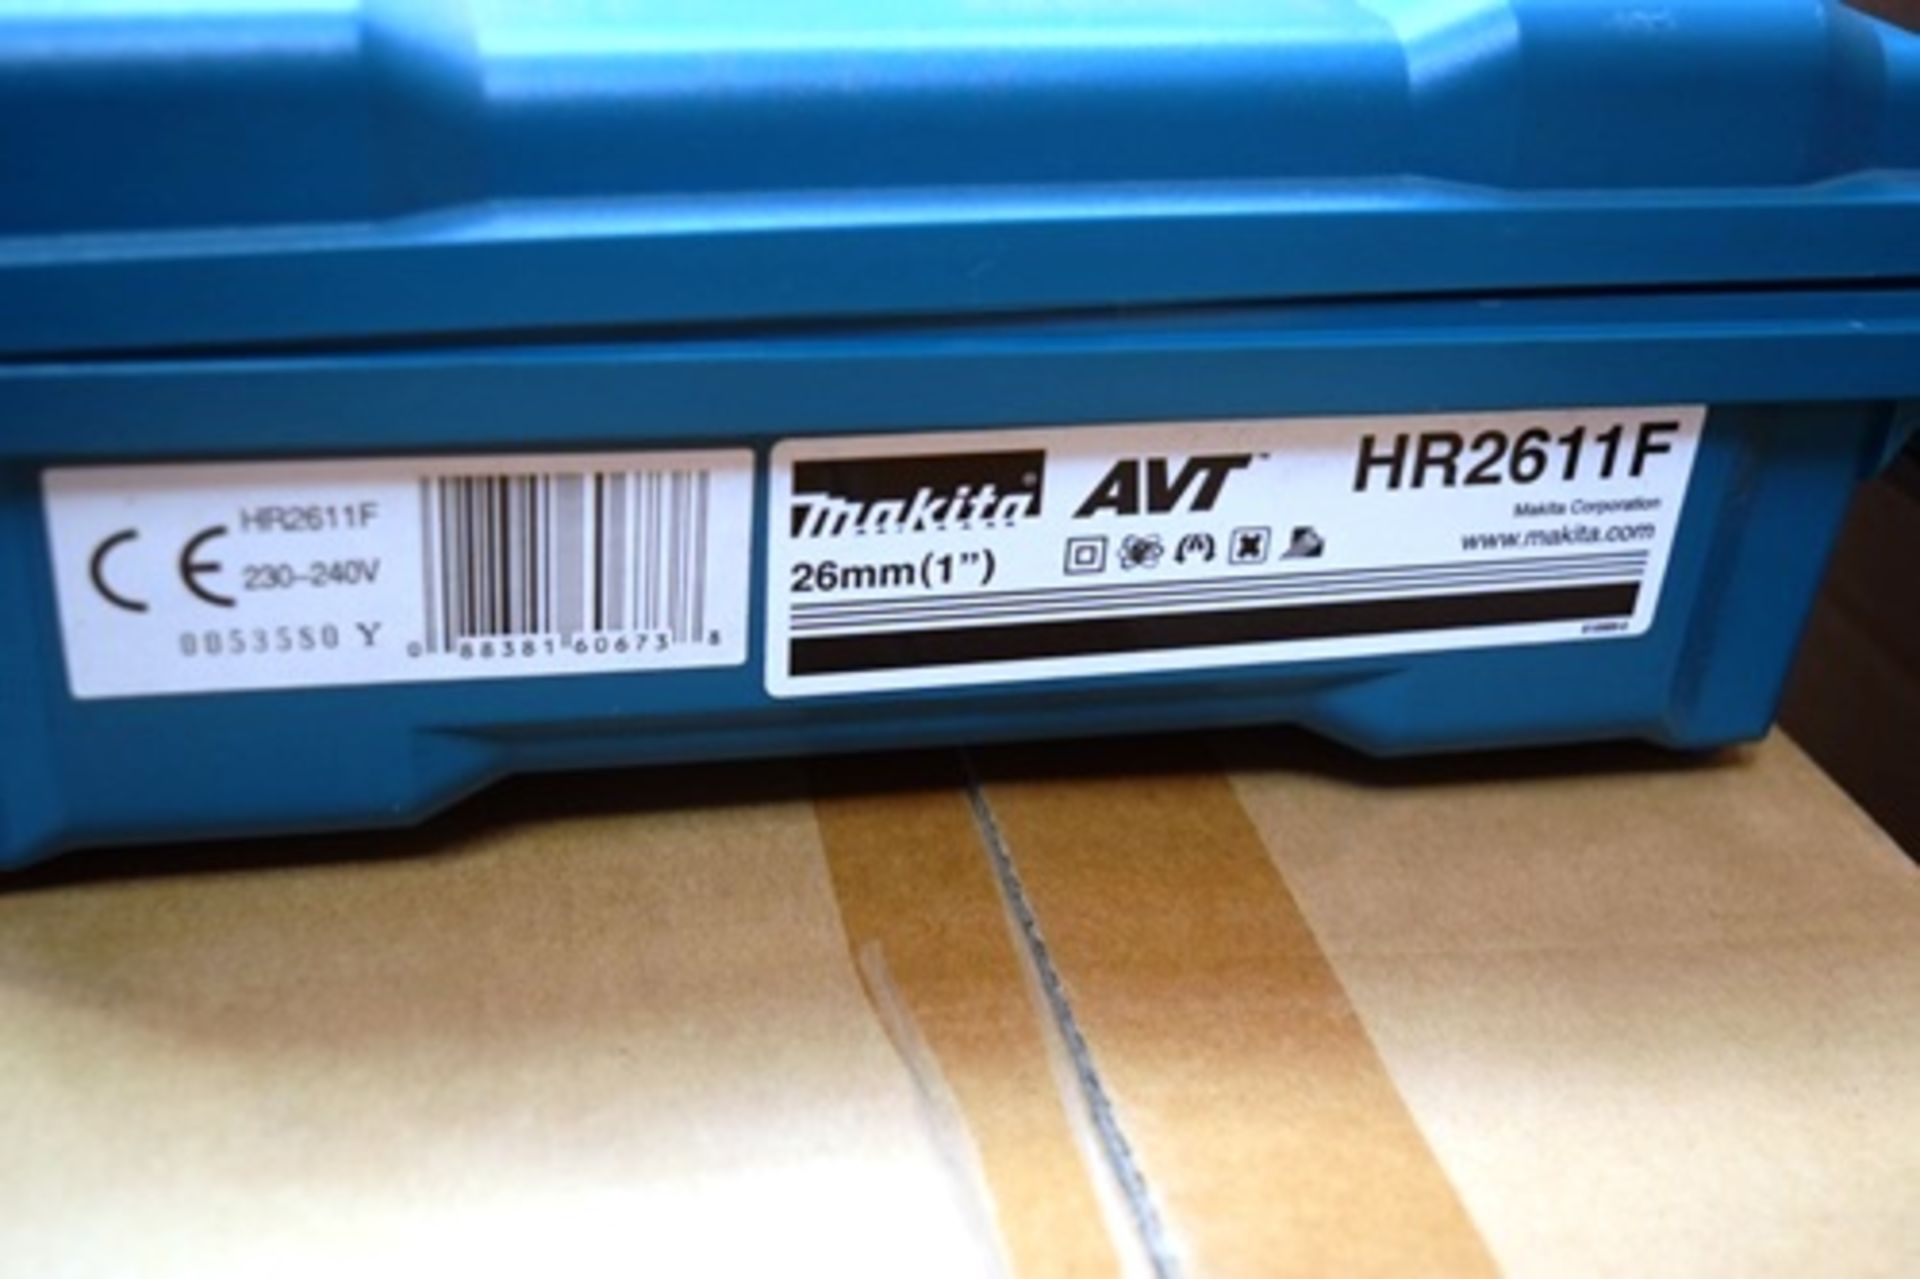 1 x Makita AVT rotary drill, model HR2611F, 240V, with instruction manual and case - Untested ( - Image 3 of 3